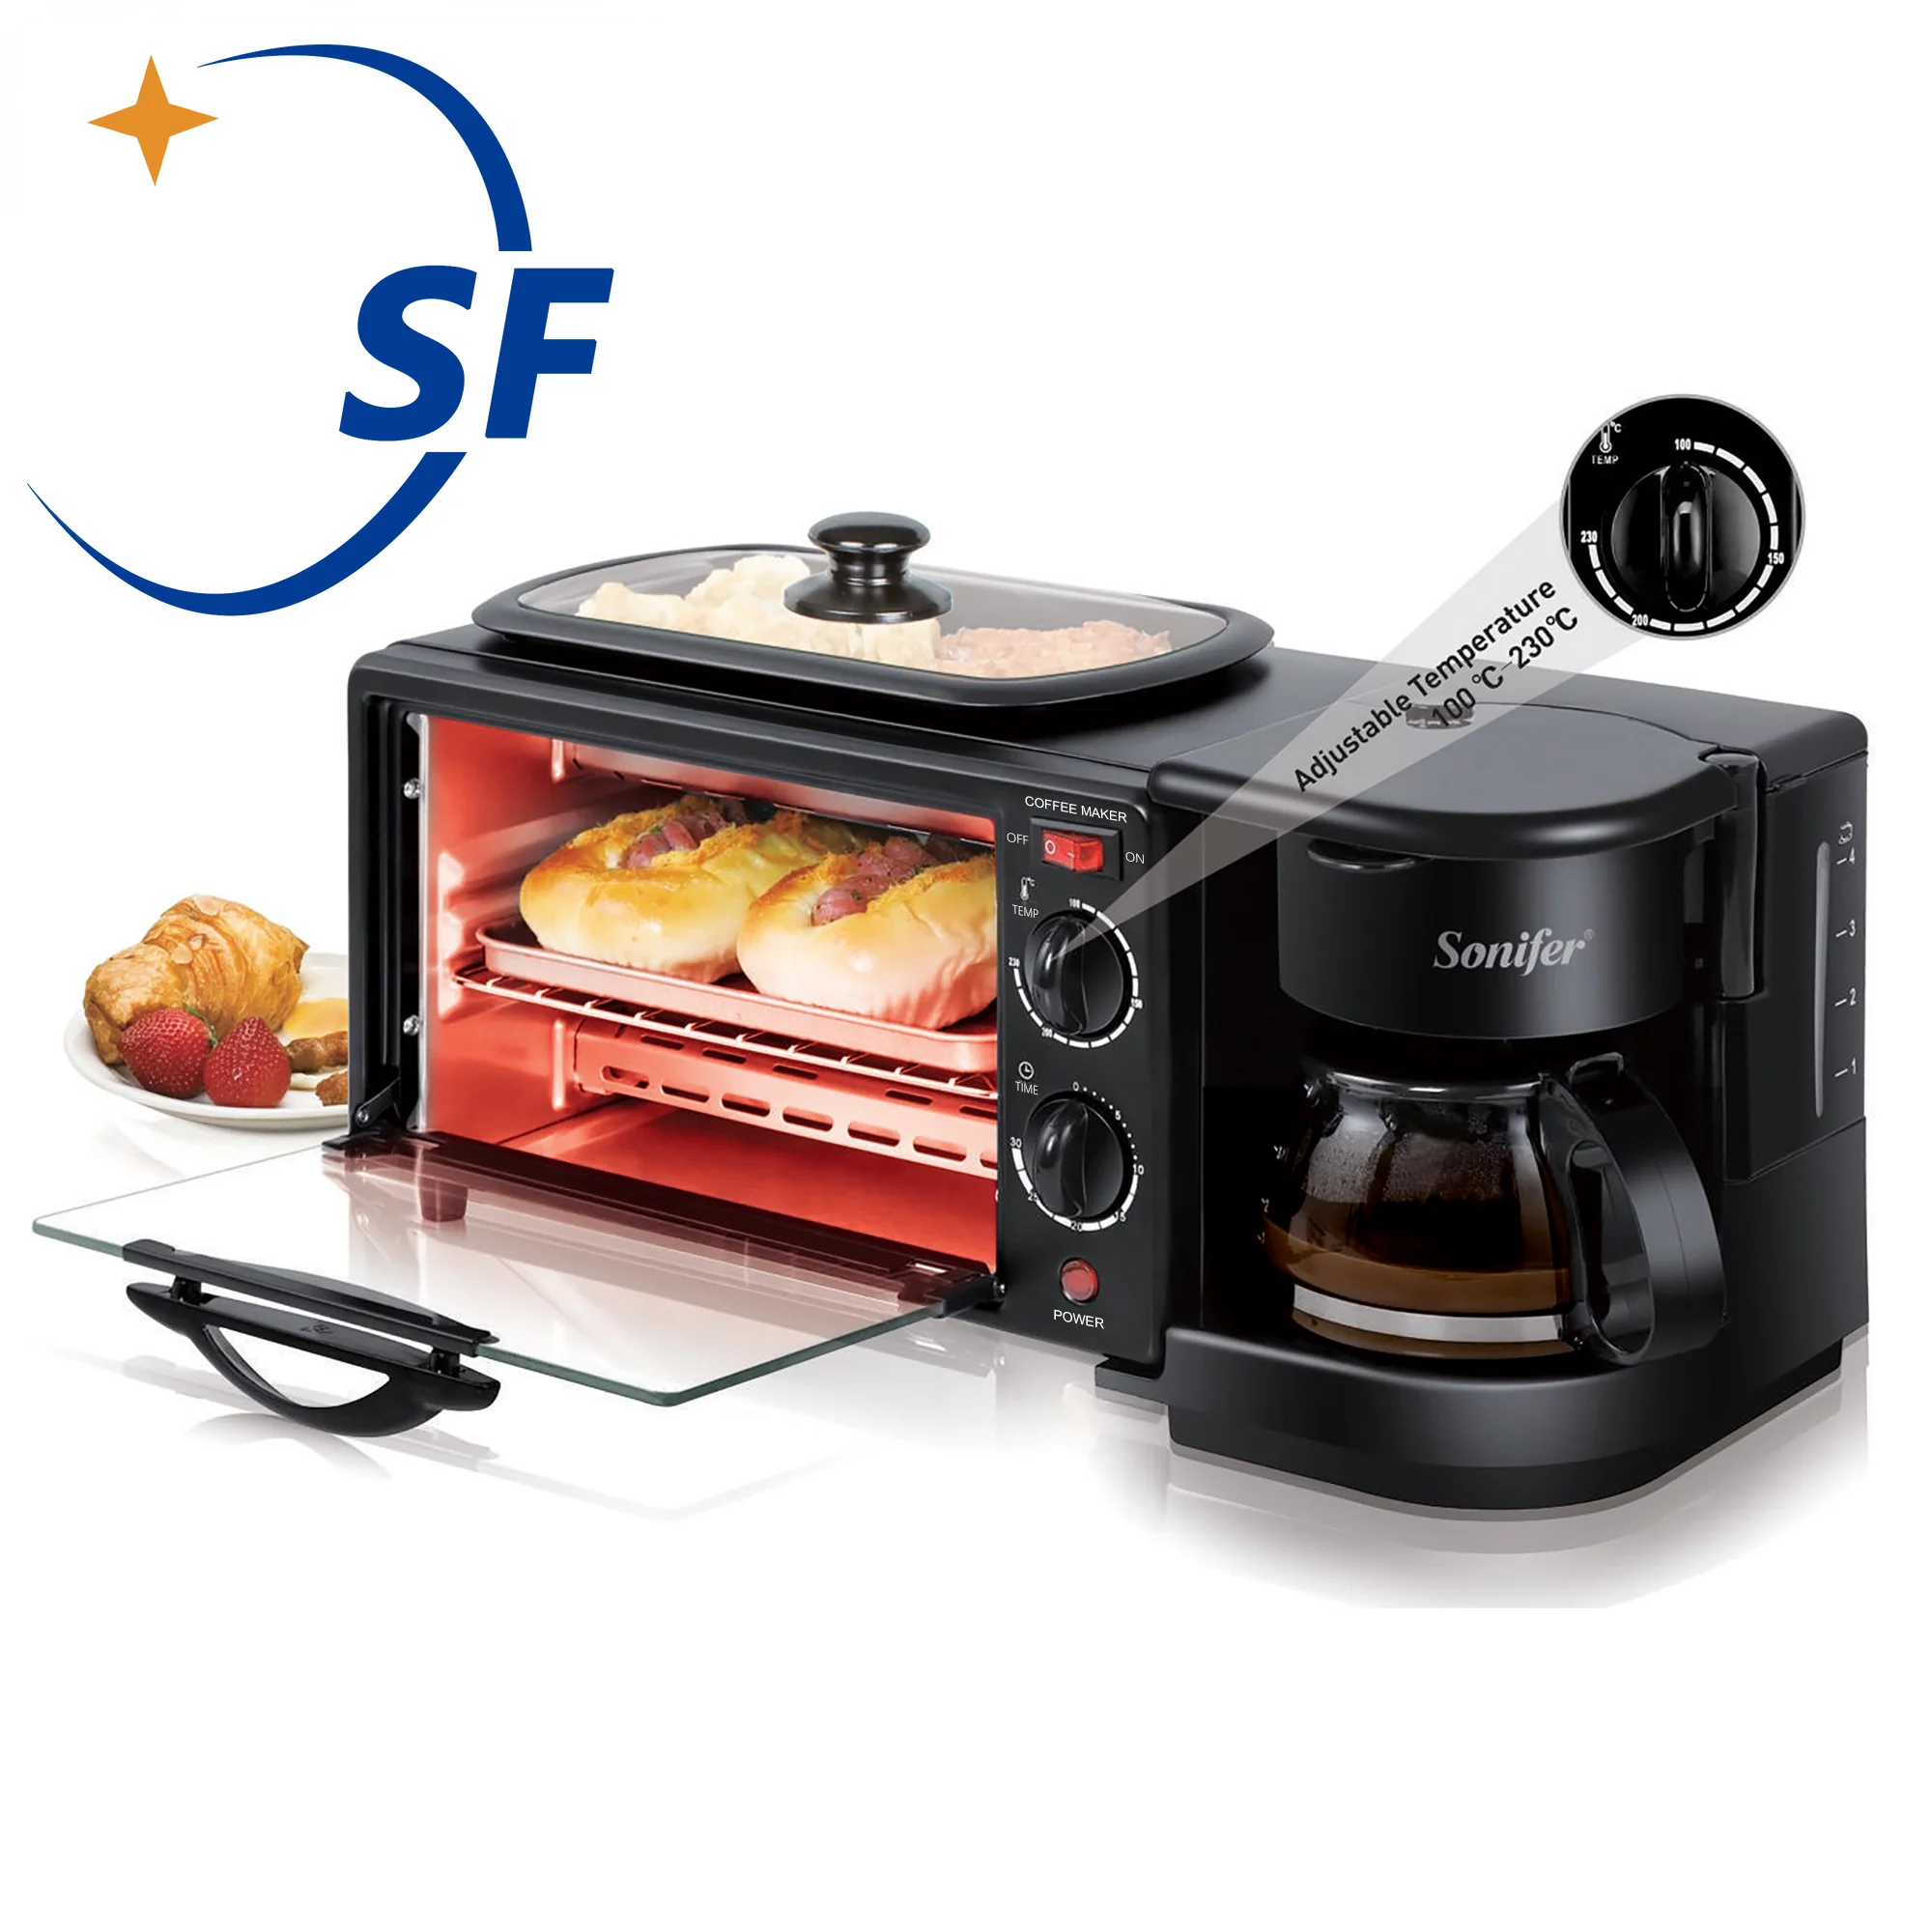 

Electric Oven 3 In 1 Breakfast Making Machine Multifunction Drip Coffee Maker Household Bread Pizza Frying Pan Toaster Sonifer